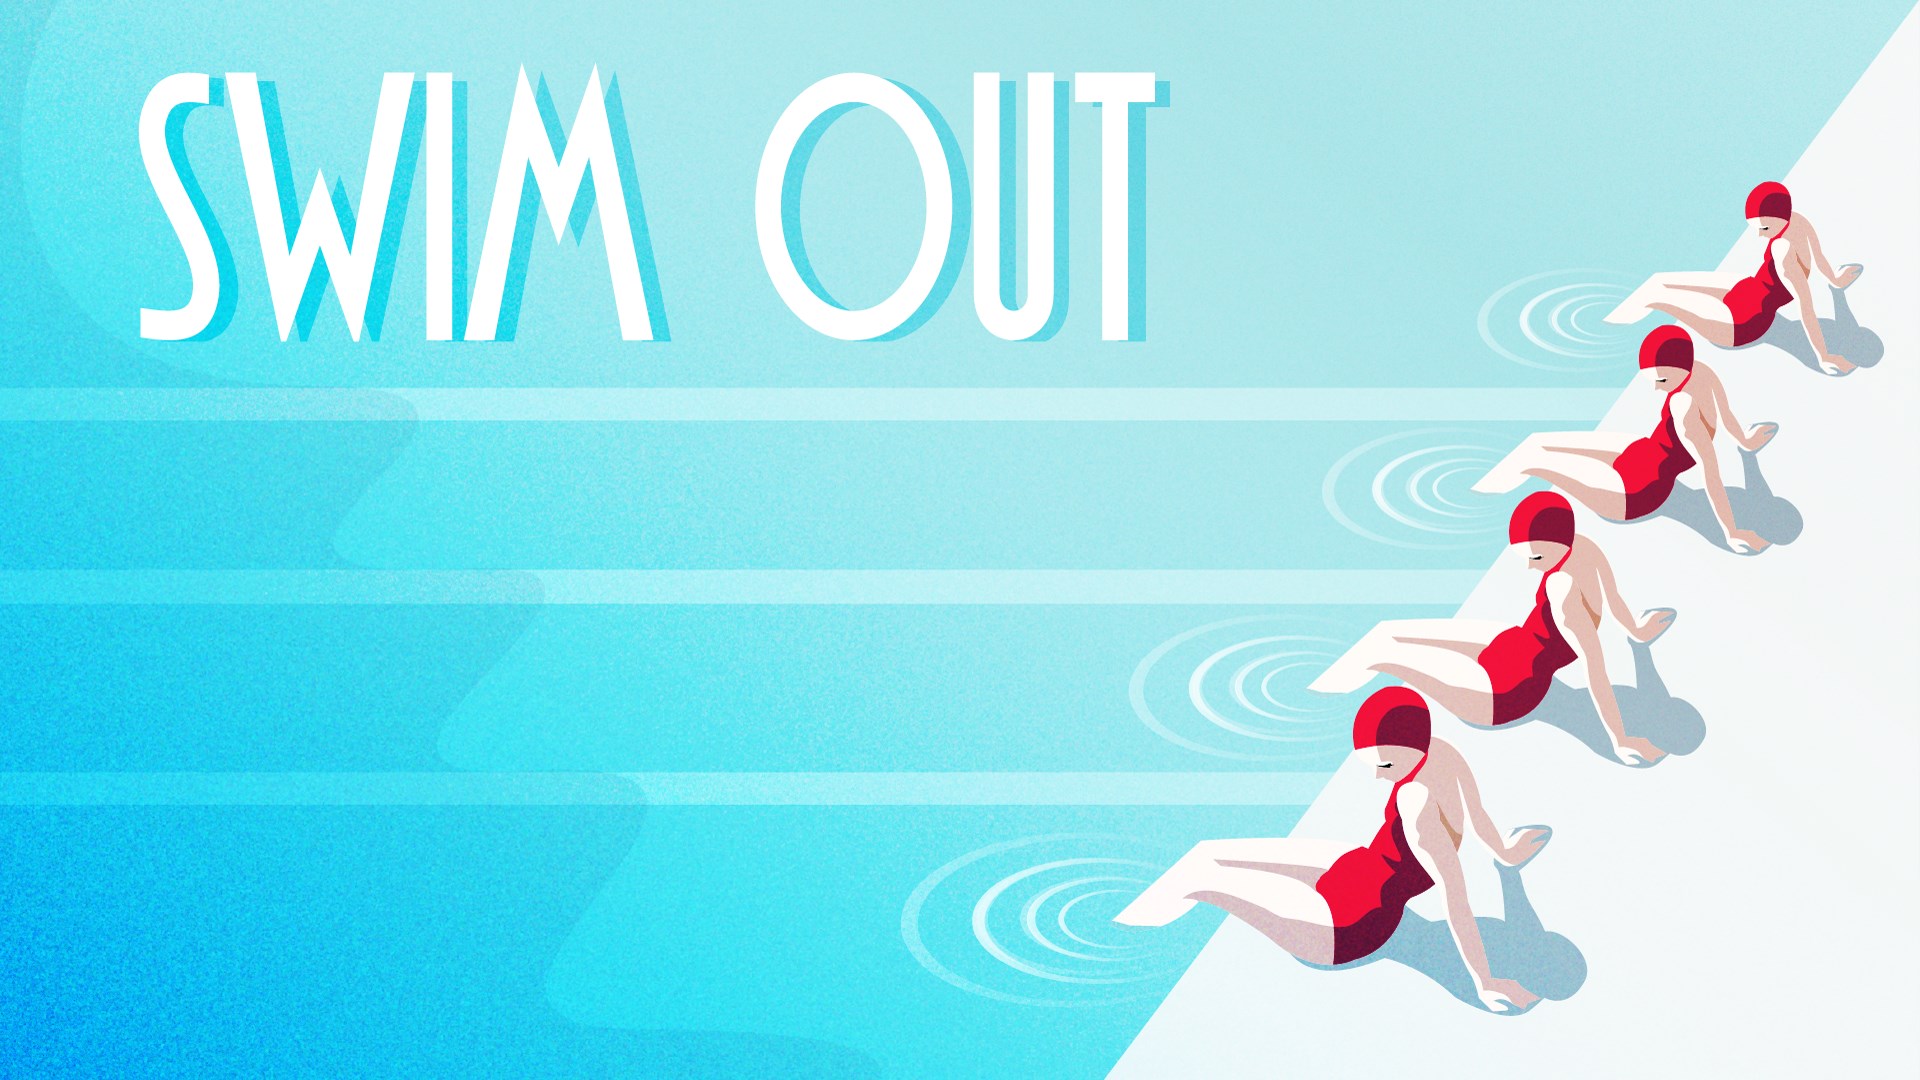 Video For Swim Out Is Now Available For Digital Pre-order And Pre-download On Xbox One